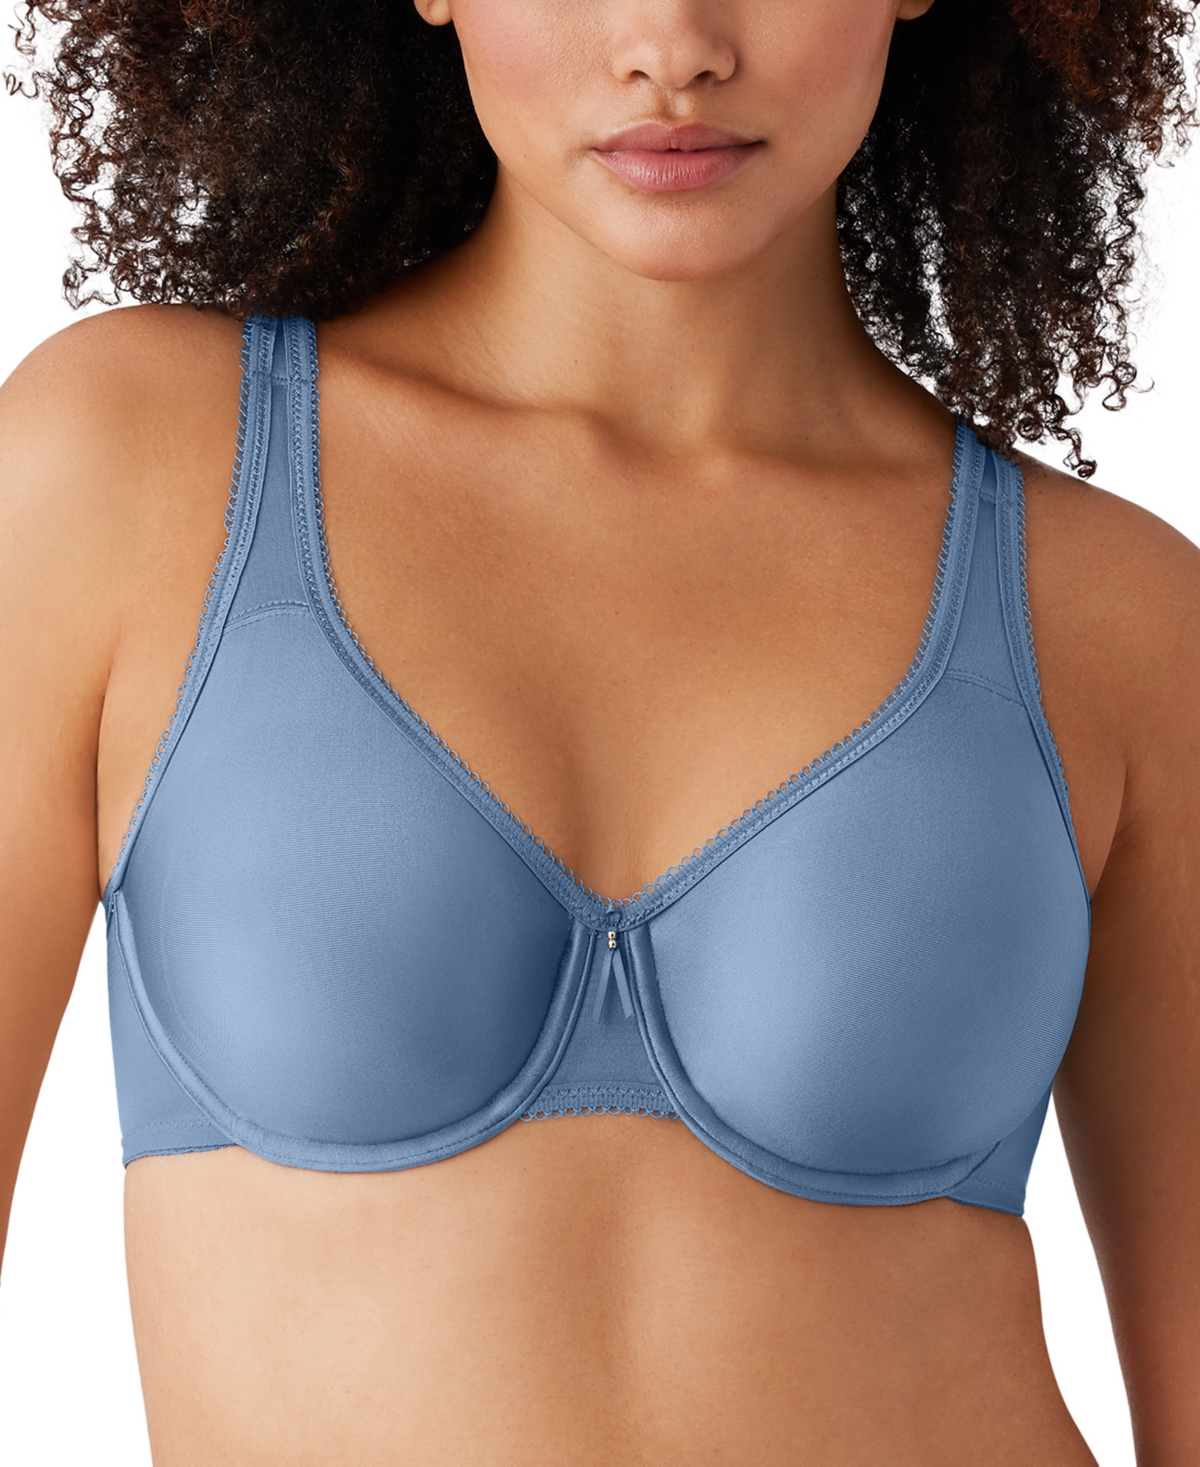 Basic Beauty Full-Figure Underwire Bra 855192, Up To H Cup - Coronet Bl